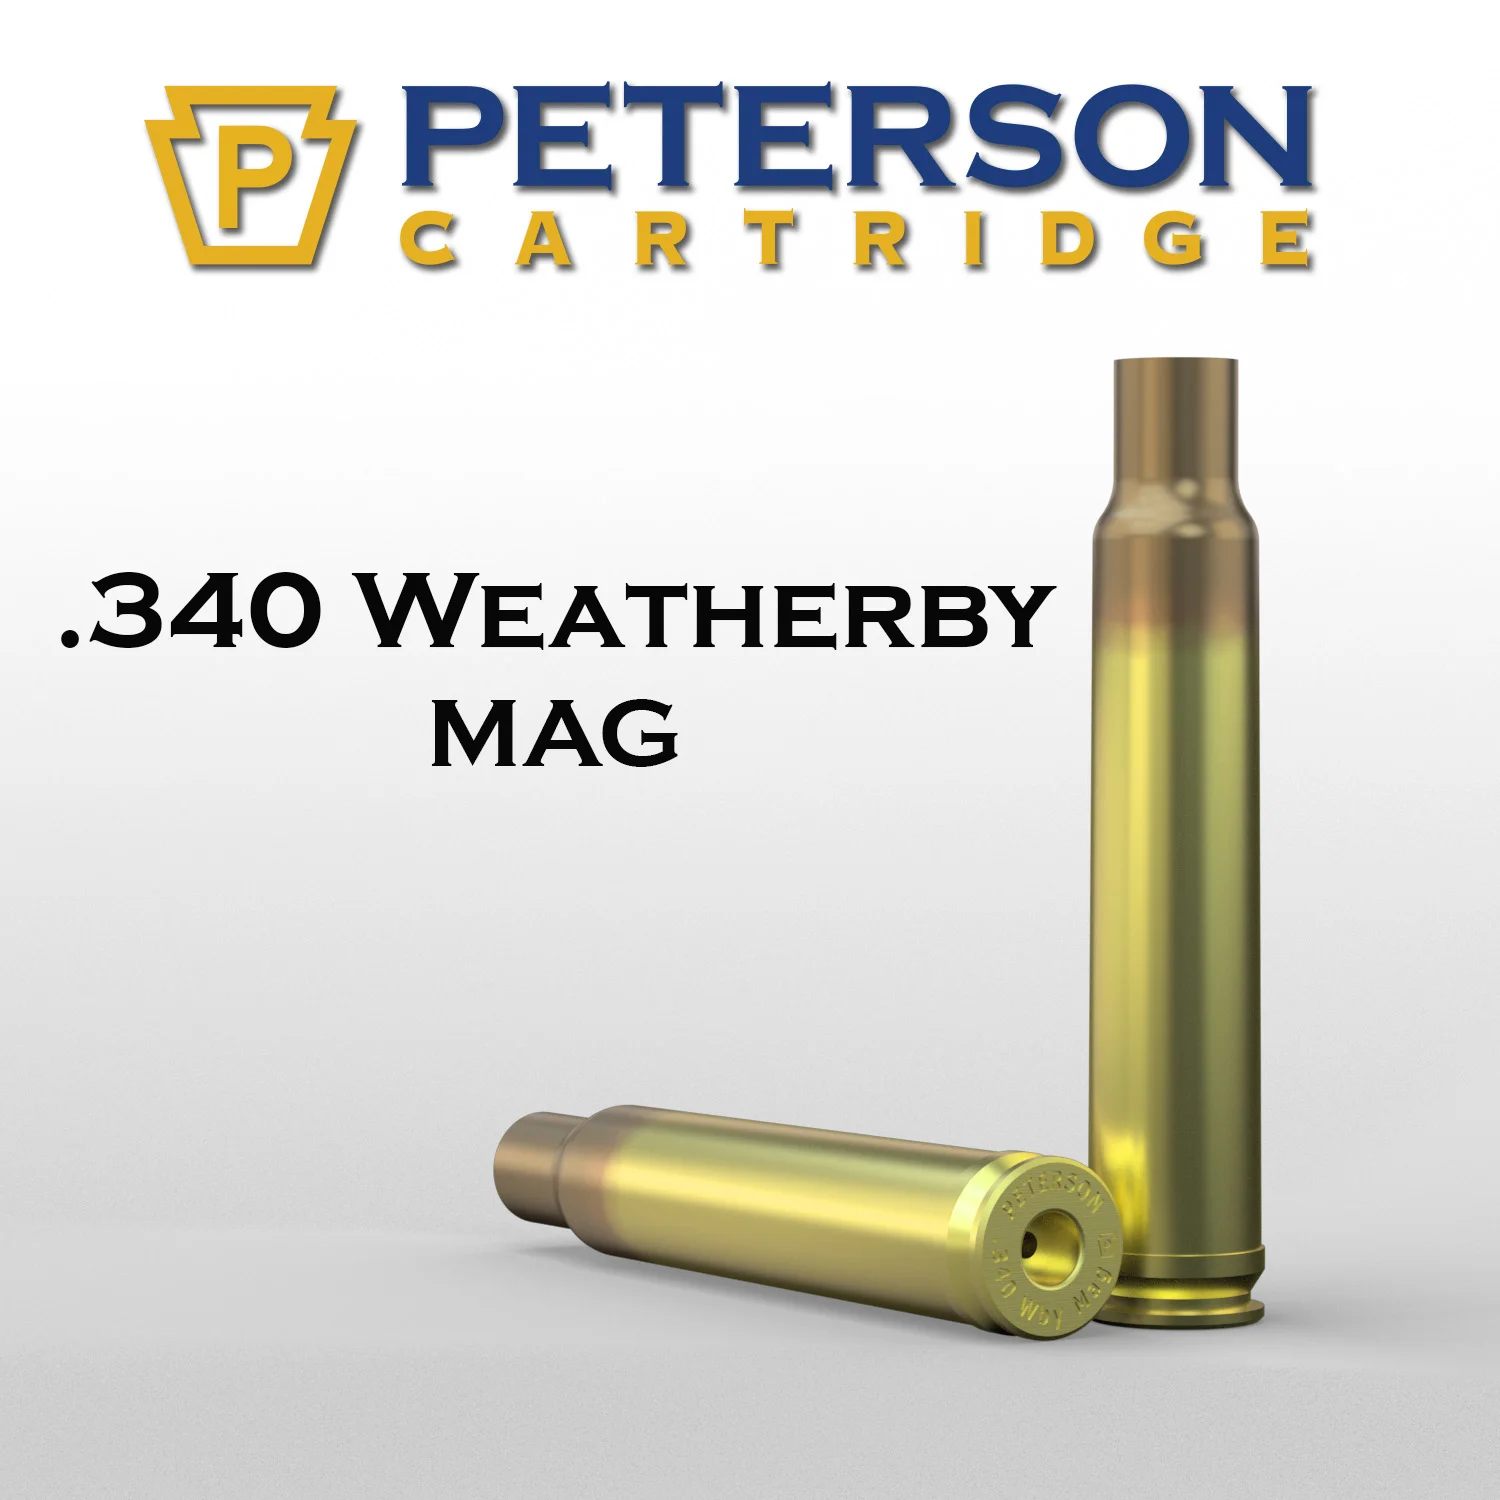 Peterson Cartridge 340 Weatherby Mag Unprimed Brass, 50ct